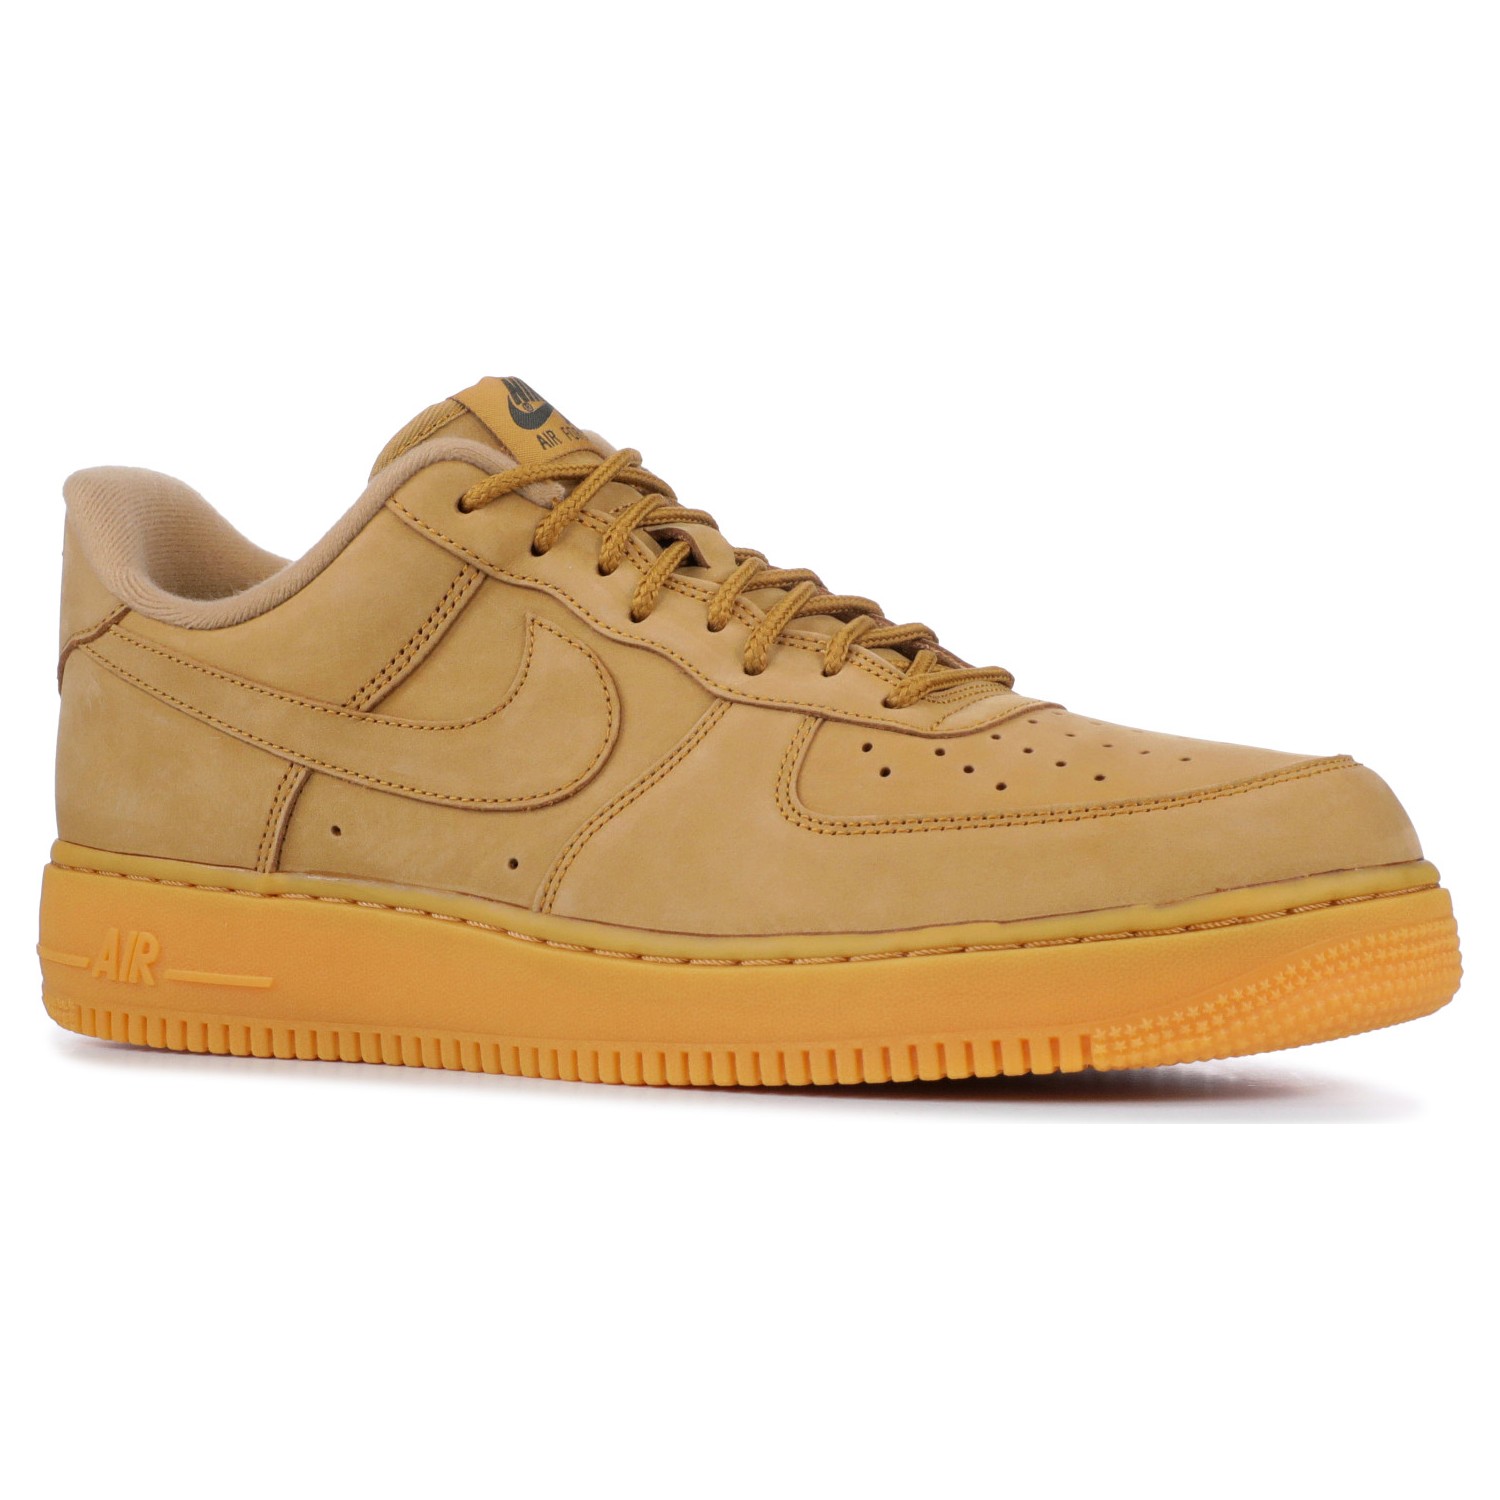 Nike Air Force 1 Suede Camel - Delivering products from abroad is ...